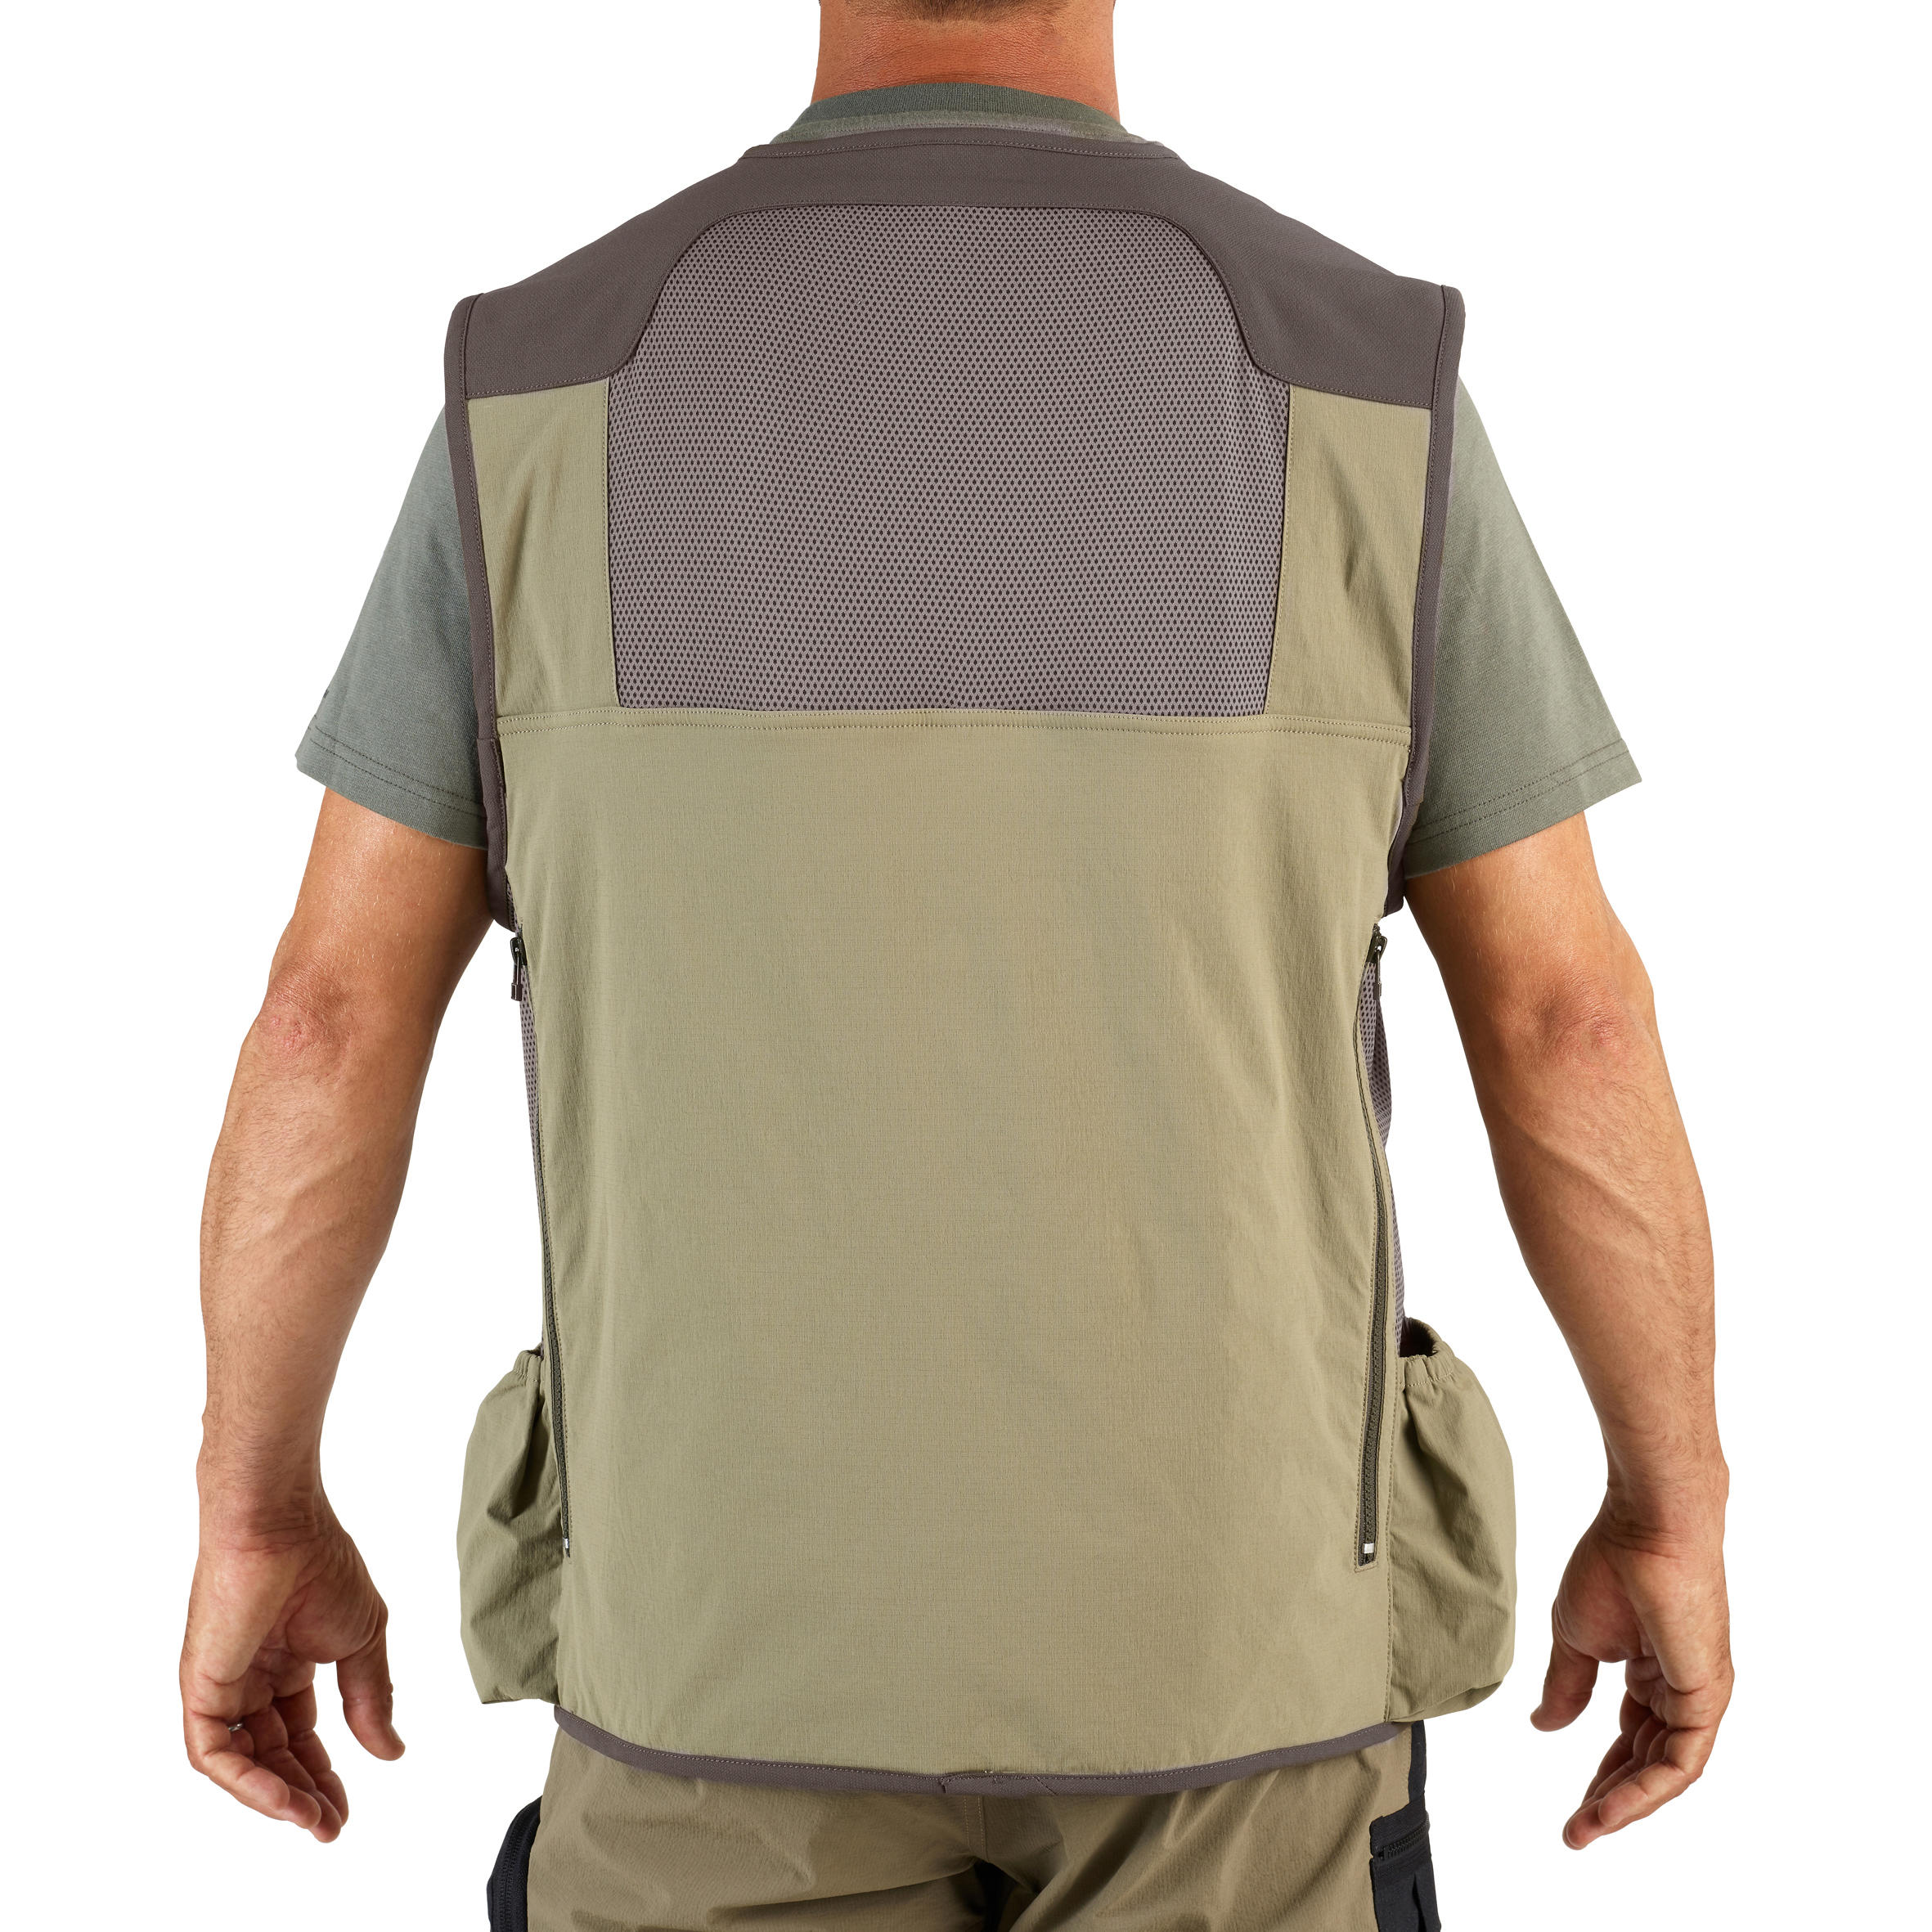 Lightweight and Breathable Waistcoat - Green 2/10